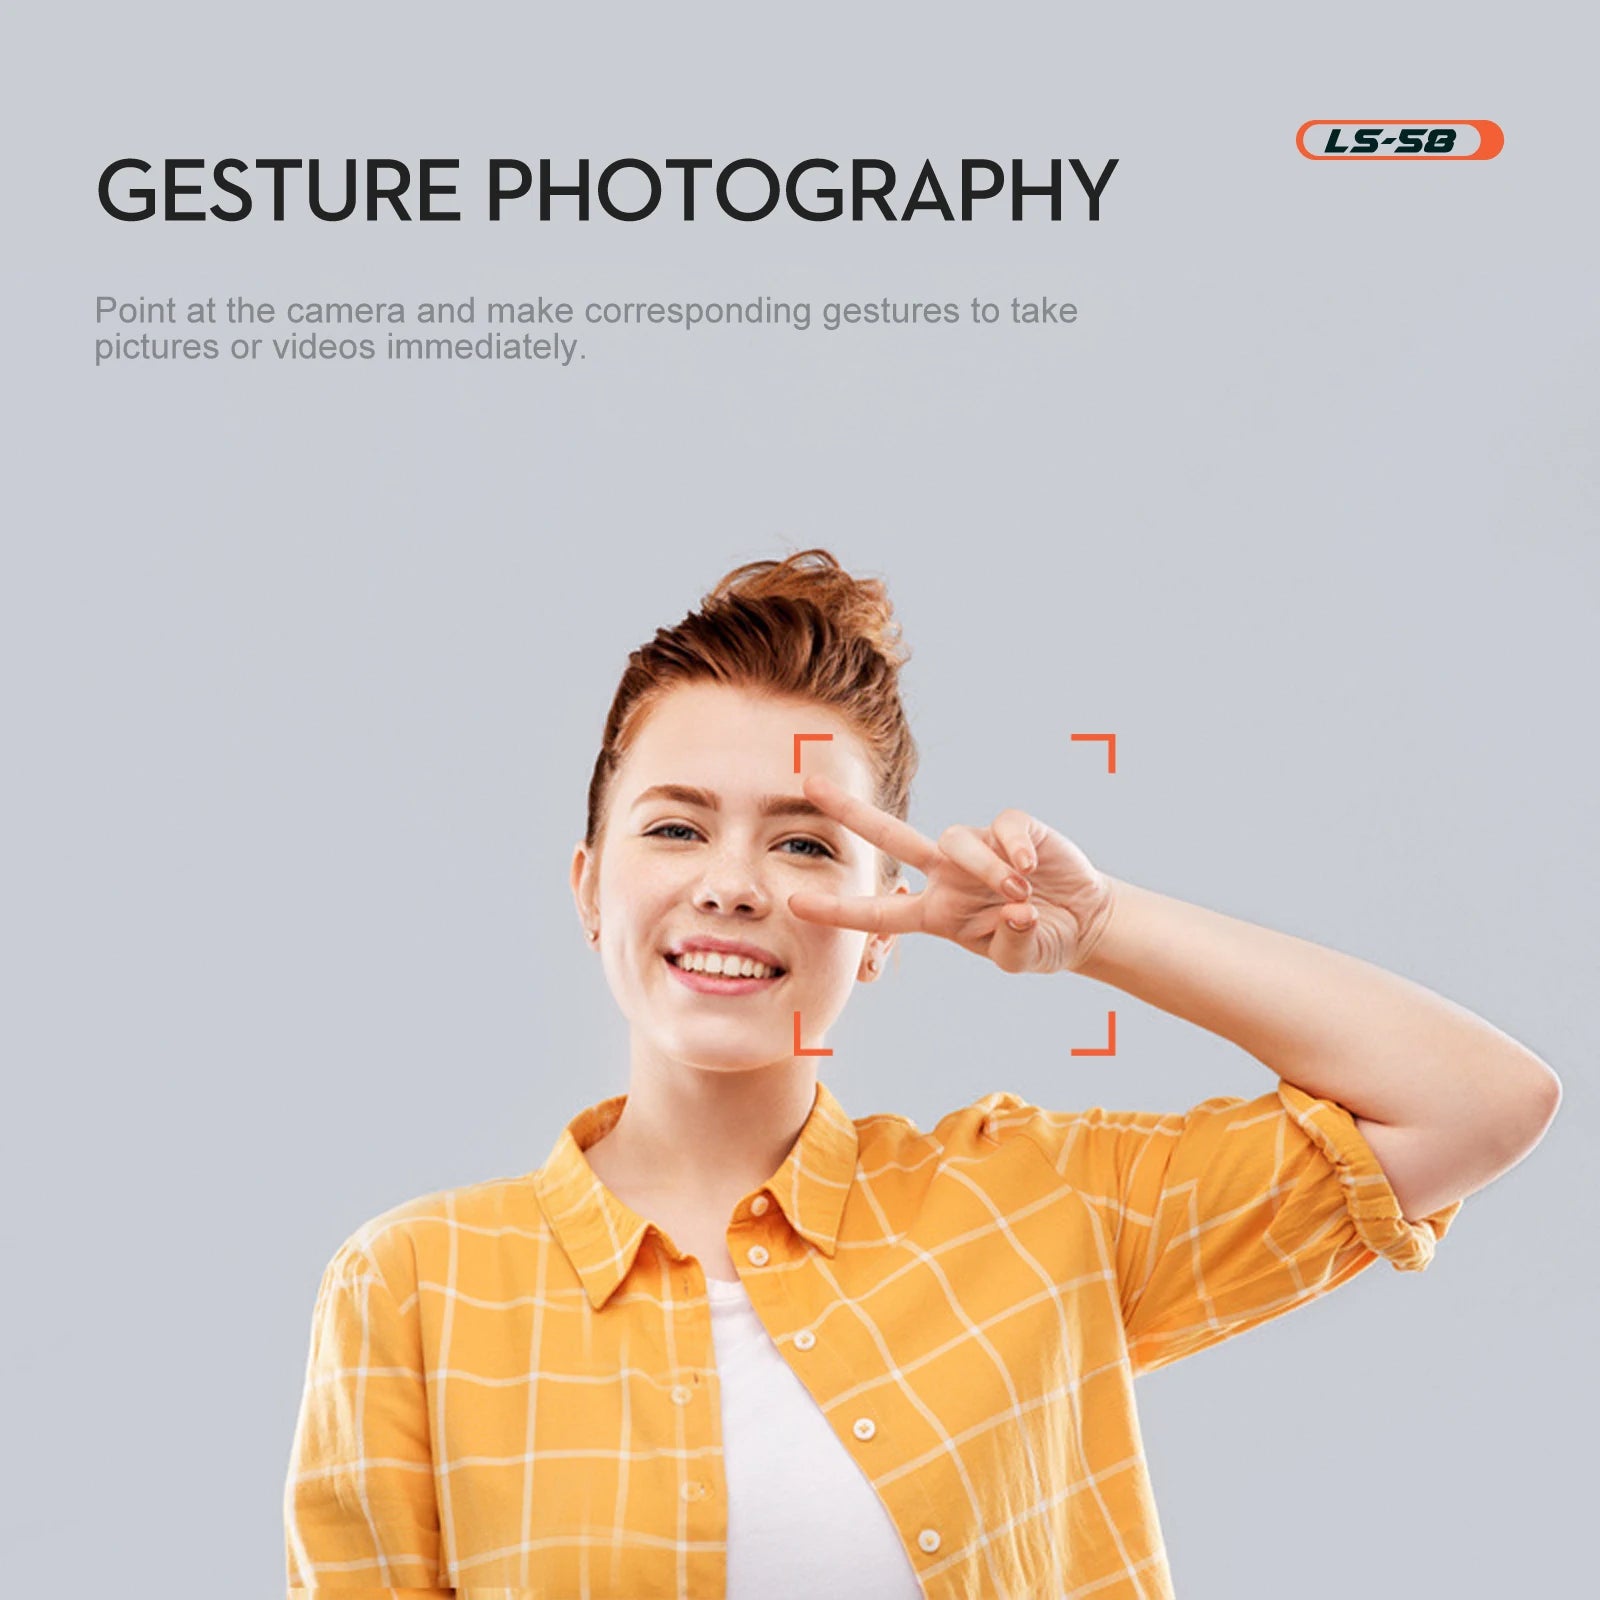 LS58 Drone, ls-5o gesture photography point at the camera and make 